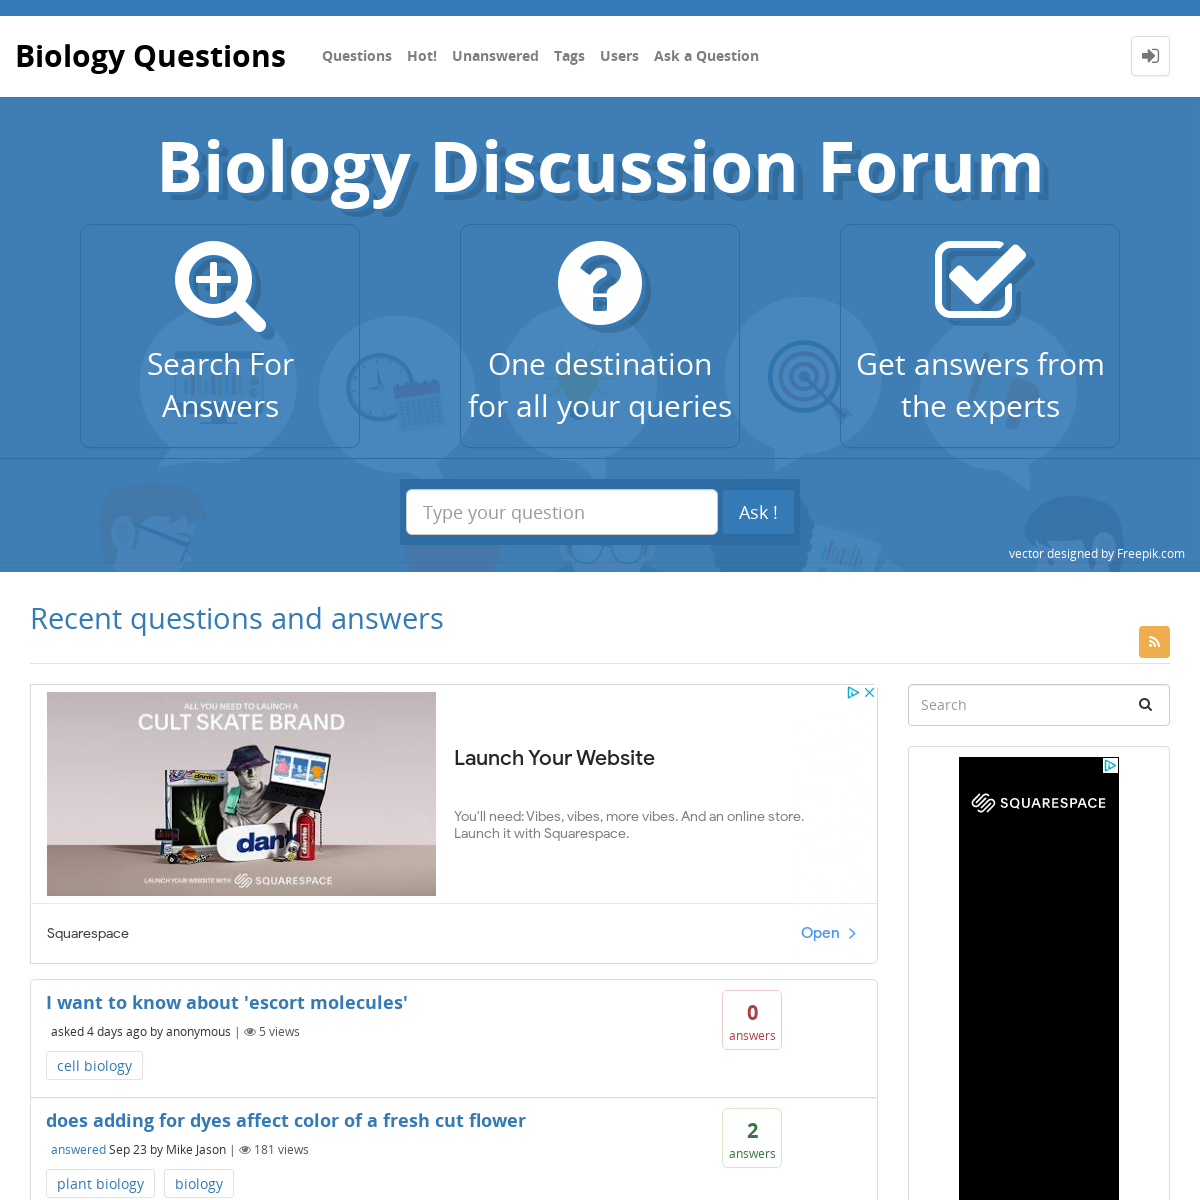 A complete backup of biologyquestions.org